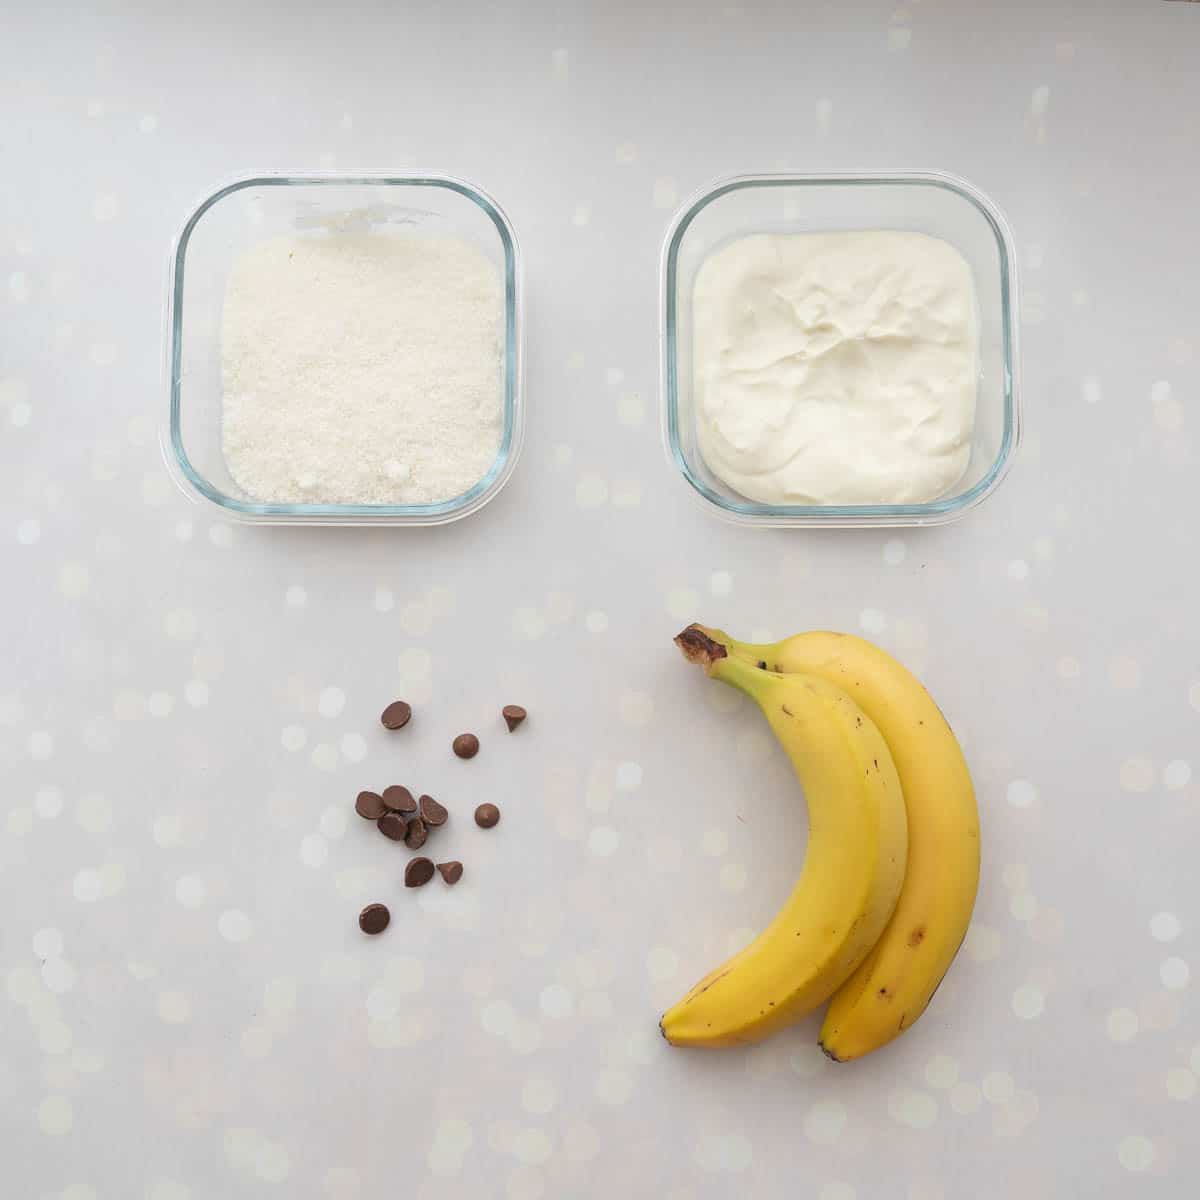 Container of yoghurt, container of desiccated coconut, two bananas and chocolate drops laid out on a bench top.